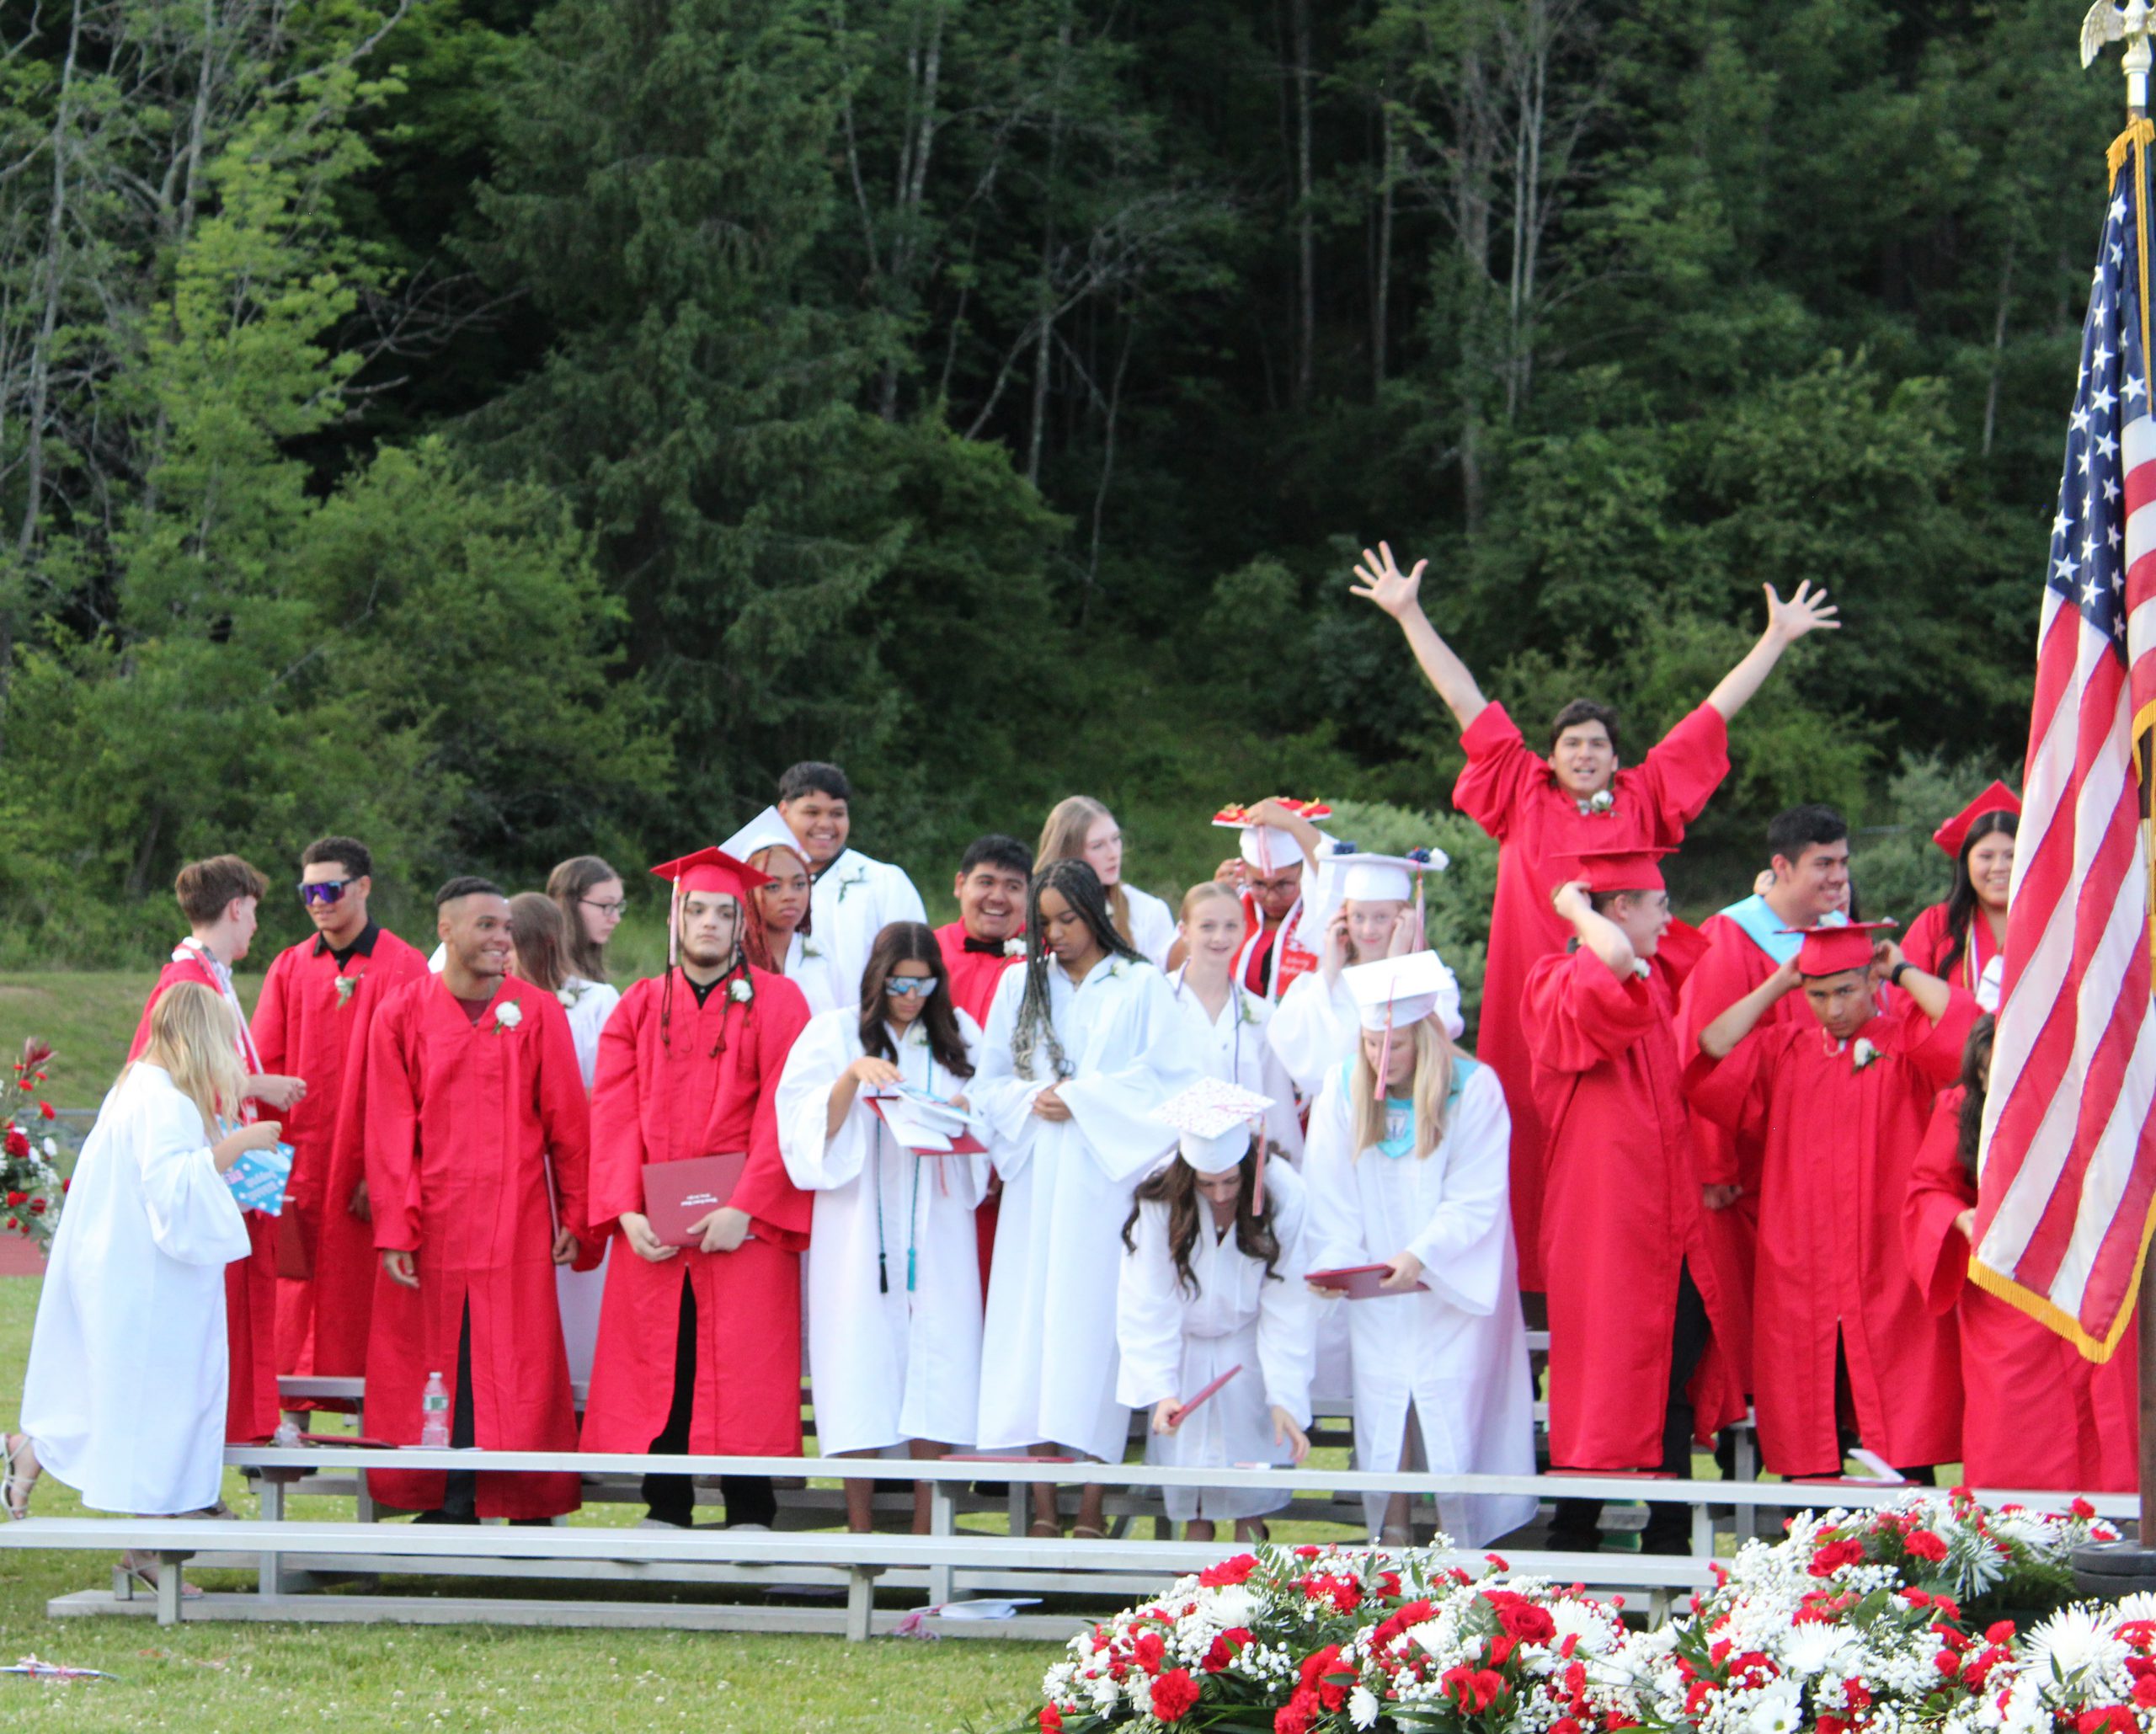 A student raises his hands in the air as other graduates stand